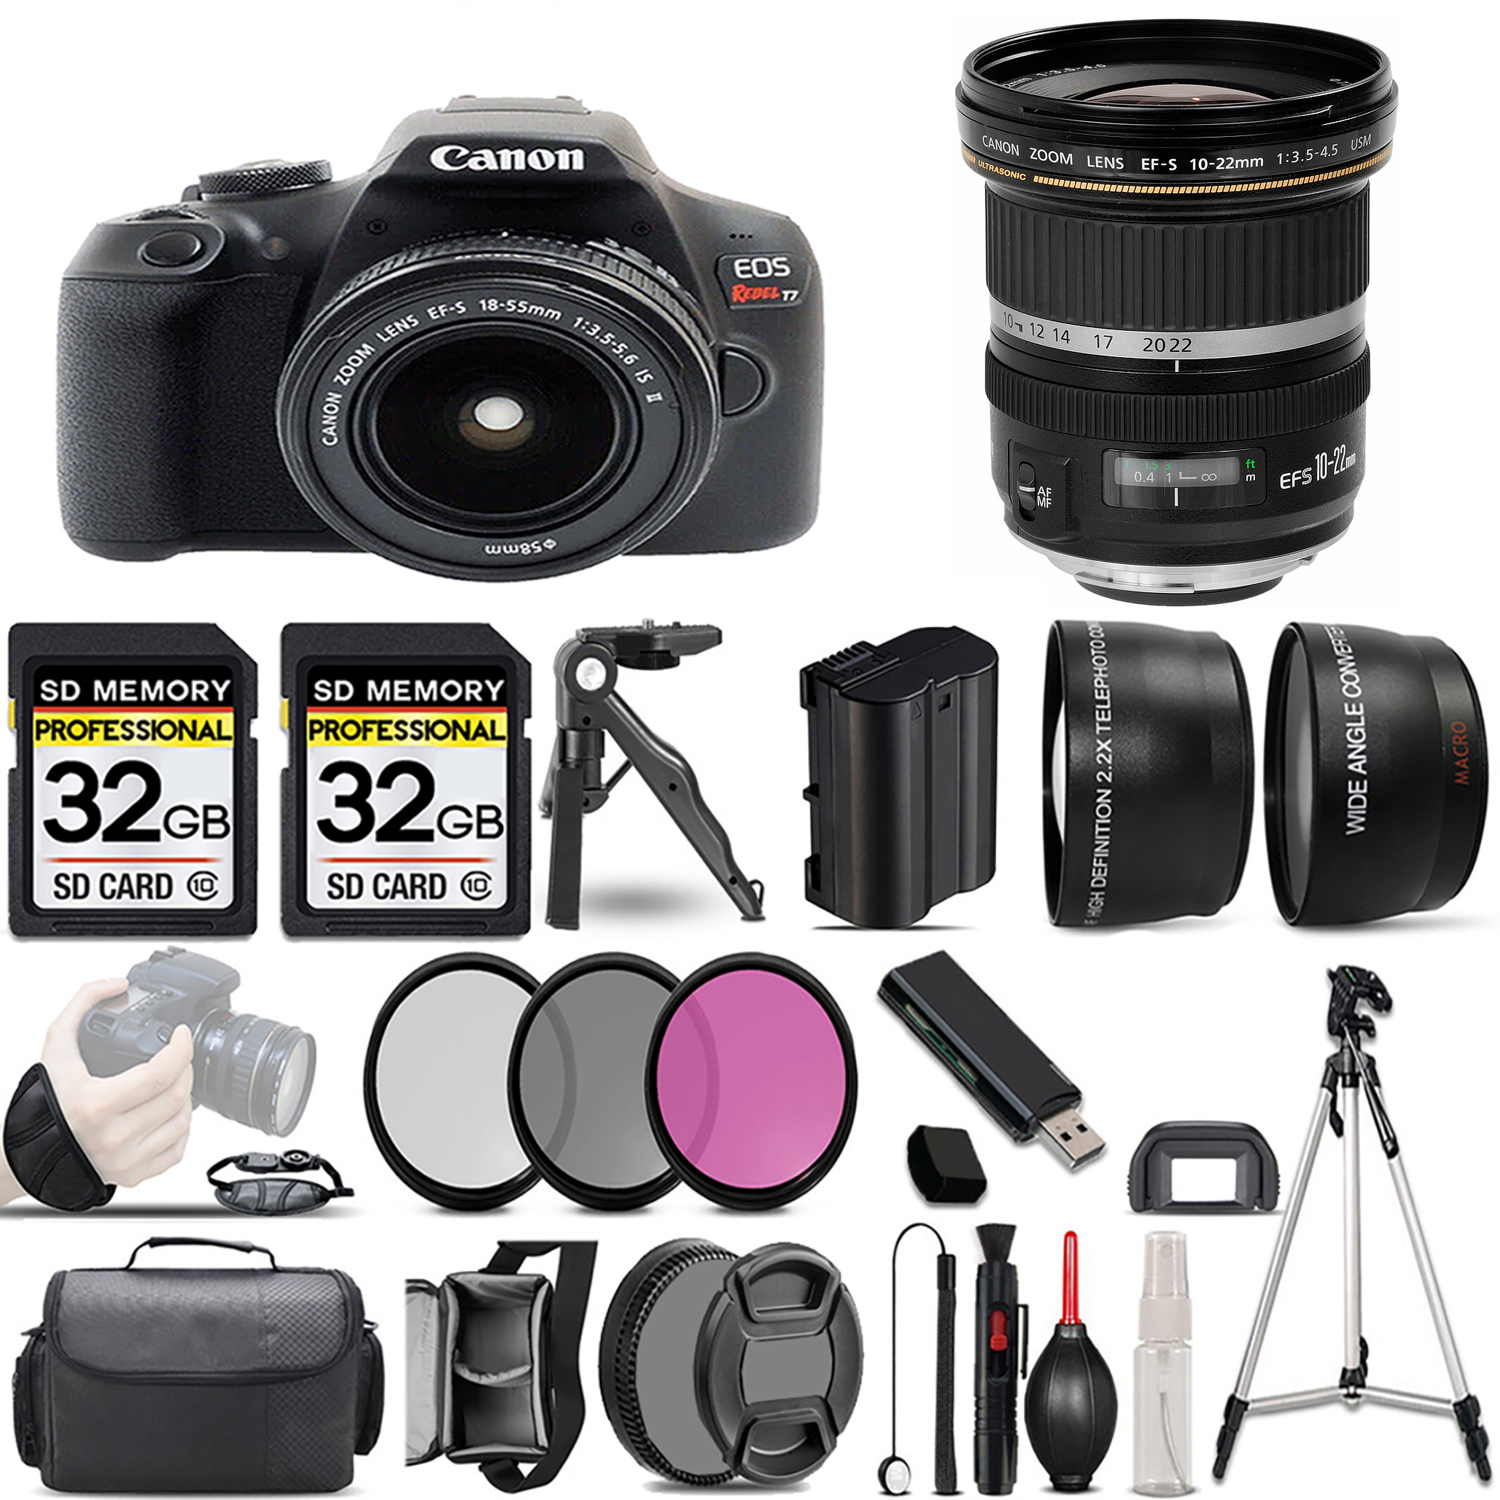 EOS Rebel T7 with 18-55mm Lens + 10-22mm f/3.5- 4.5 USM Lens + 3 Piece Filter Set + 64GB *FREE SHIPPING*